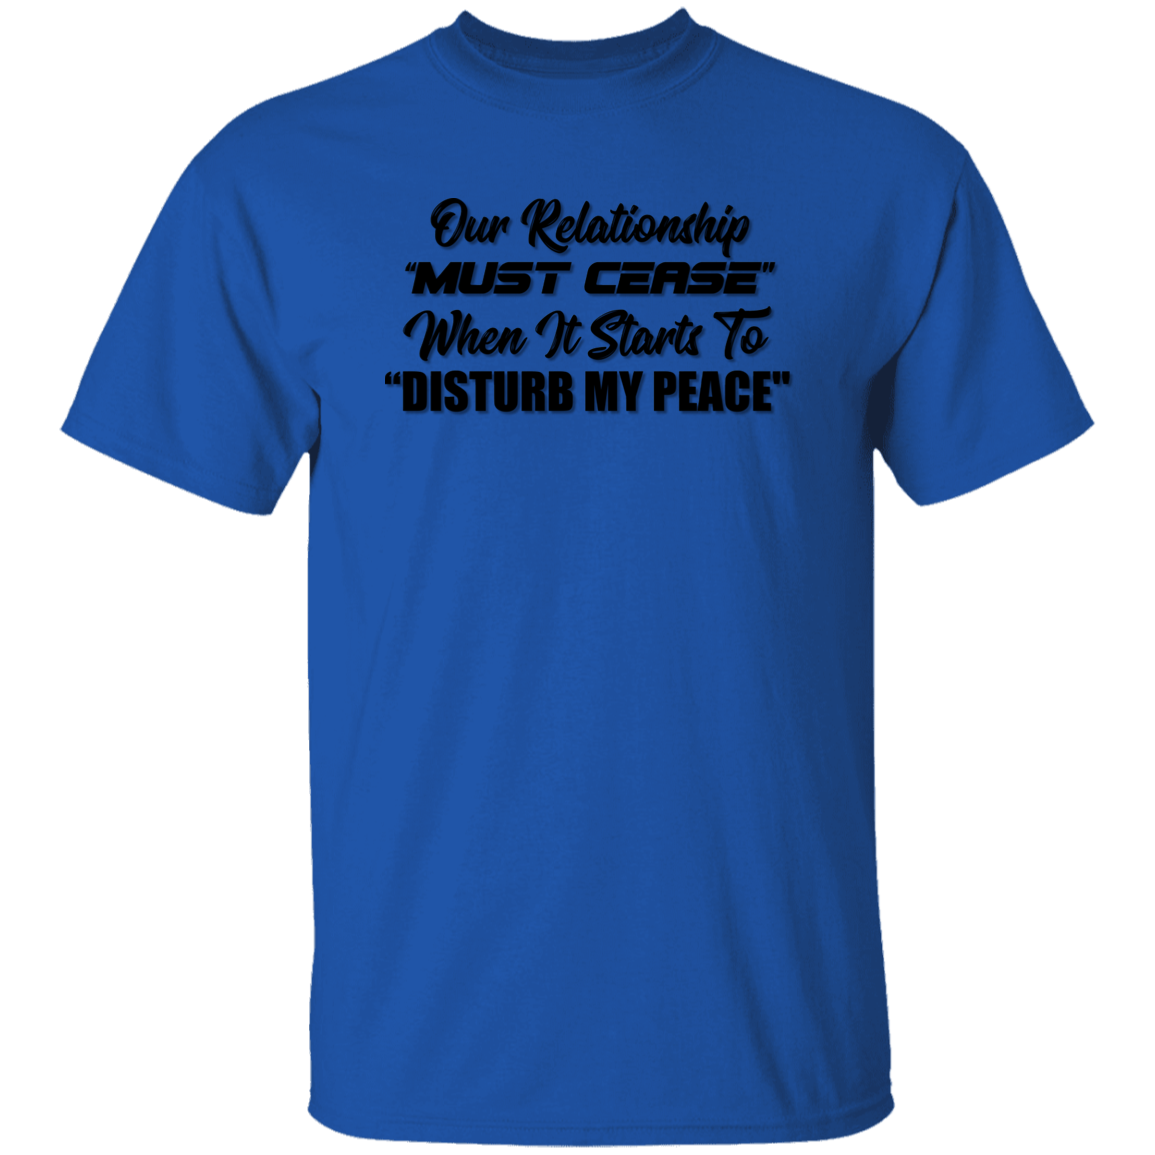 OUR RELATIONSHIP "MUST CEASE" WHEN IT START TO "DISTURB MY PEACE"  T-Shirt (MORE COLOR OPTIONS)